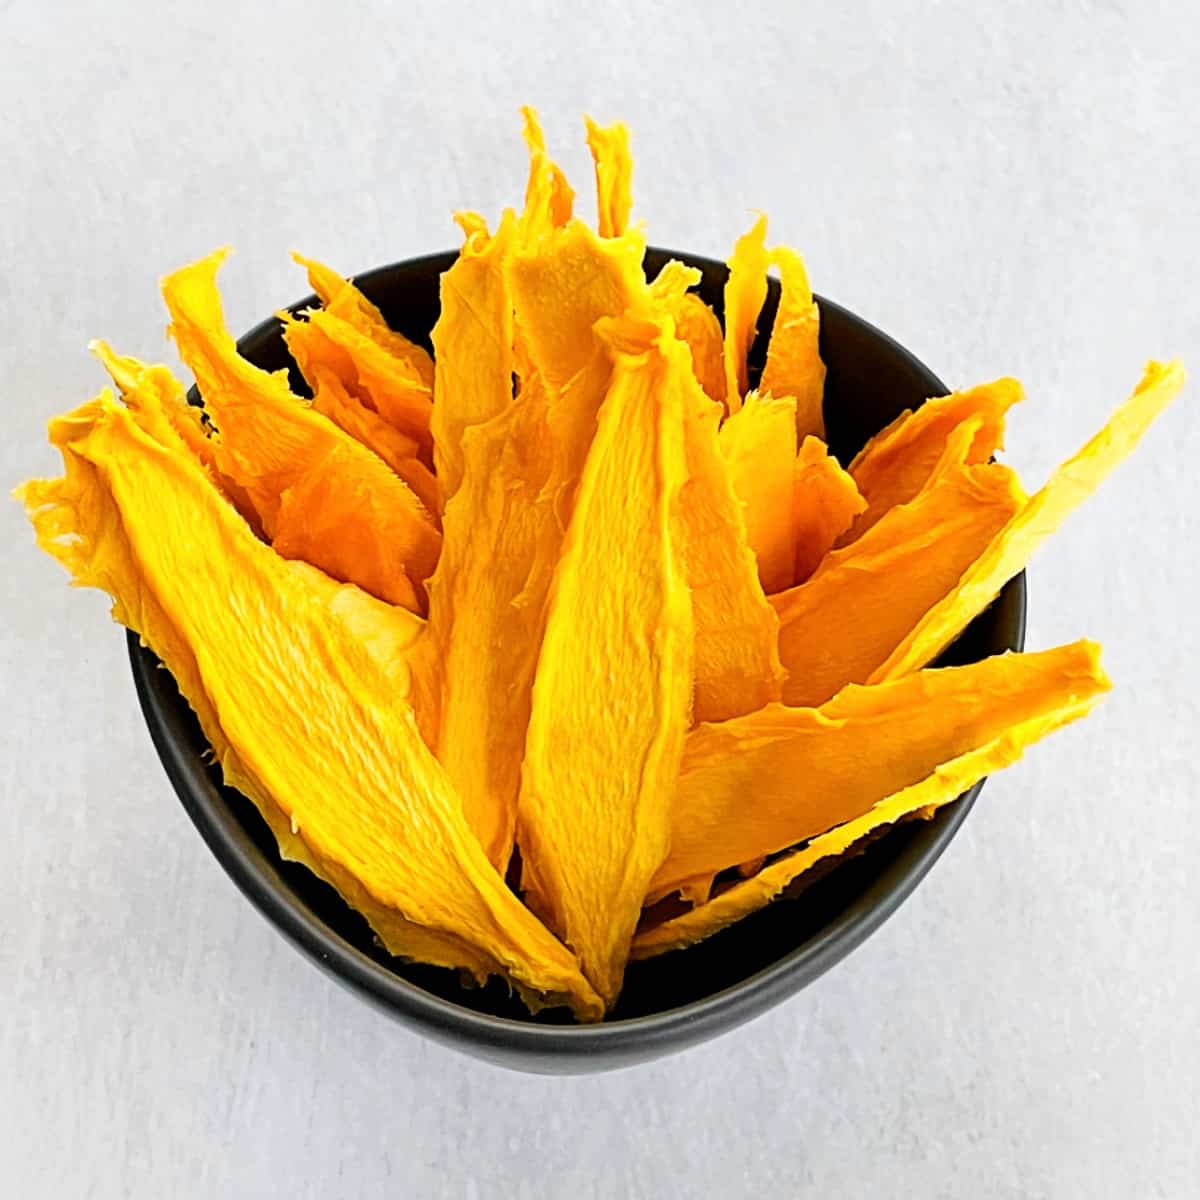 dehydrated mango slices in a bowl